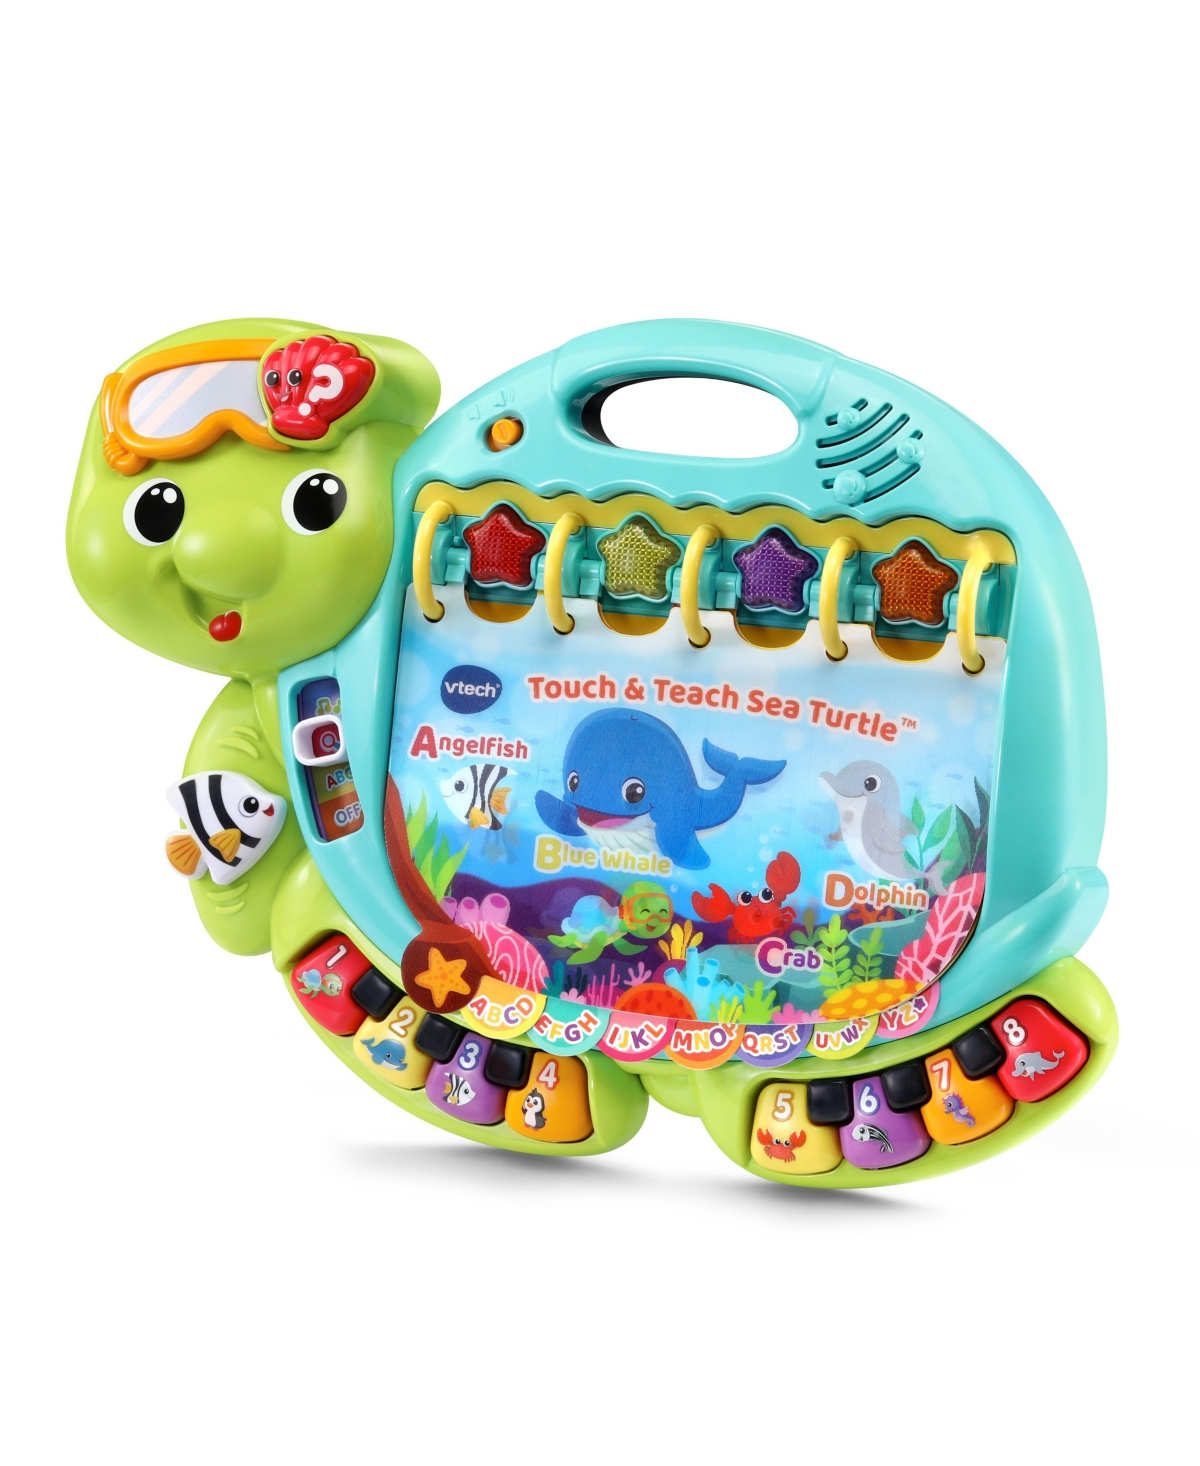 Vtech Babies' Touch & Teach Sea Turtle In Multi Color